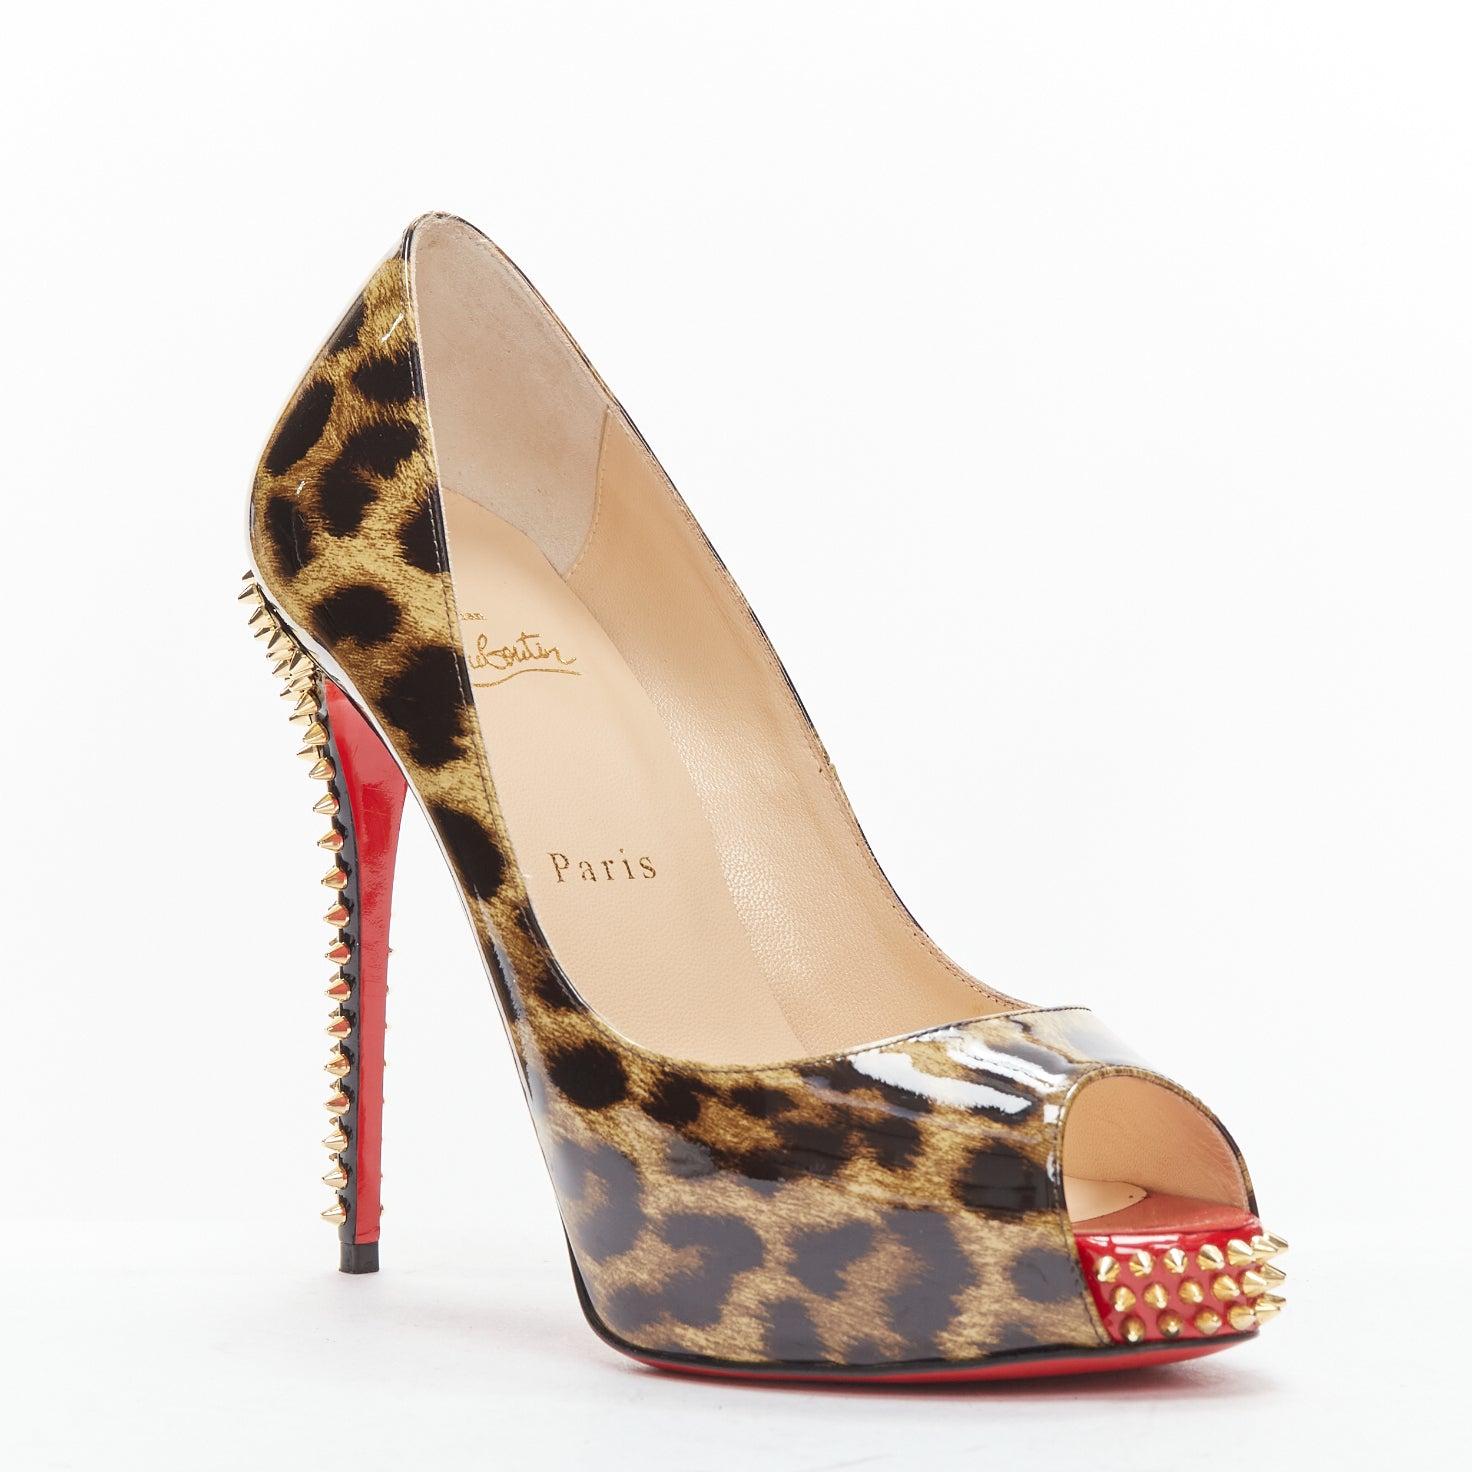 CHRISTIAN LOUBOUTIN Very Prive 120 leopard patent gold spike platform heels EU38
Reference: TGAS/D00720
Brand: Christian Louboutin
Model: Very Prive Spikes 120
Material: Patent Leather
Color: Brown, Gold
Pattern: Leopard
Closure: Slip On
Lining: